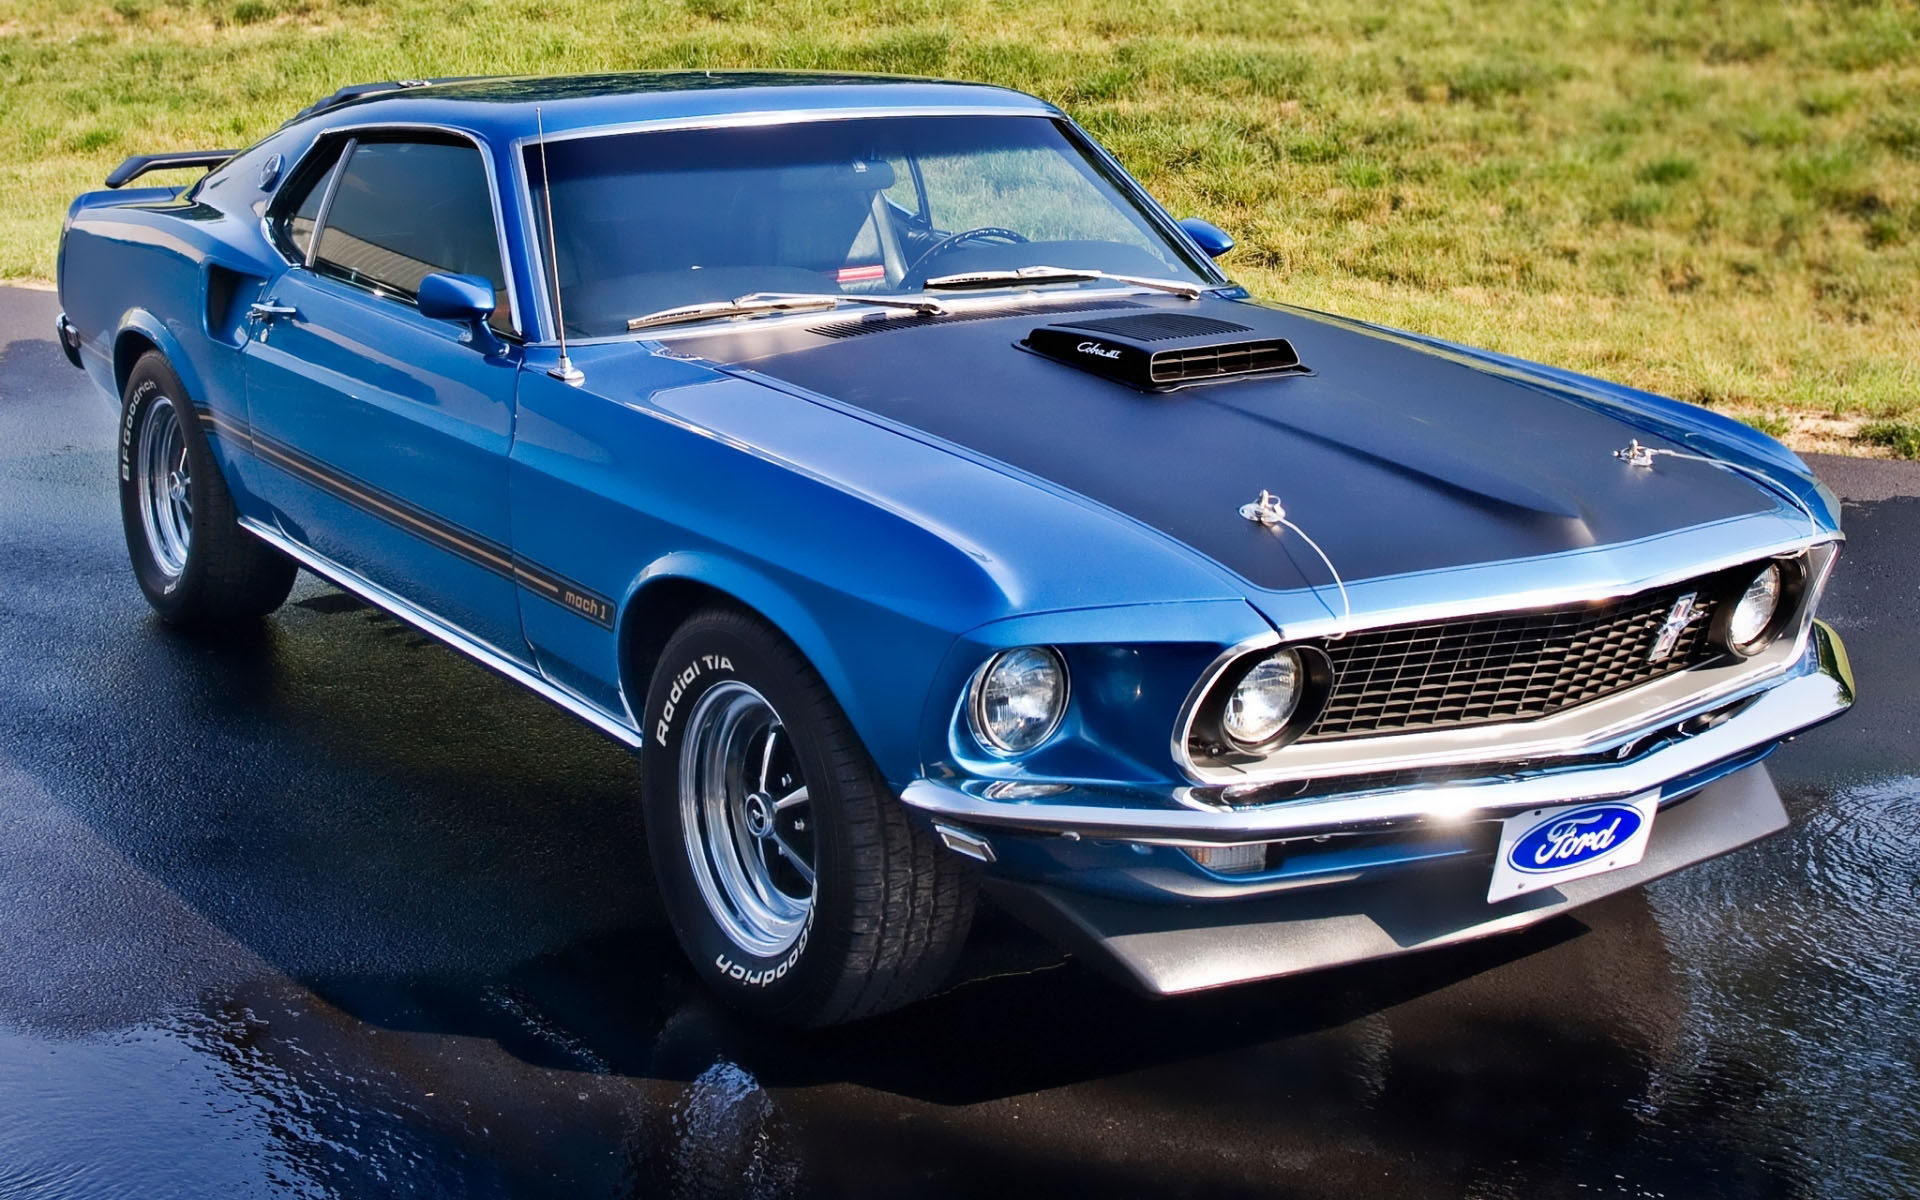 1920x1200 1969 Mustang Mach 1 428 Super Cobra Jet This has been my dream car since  before I could drive!